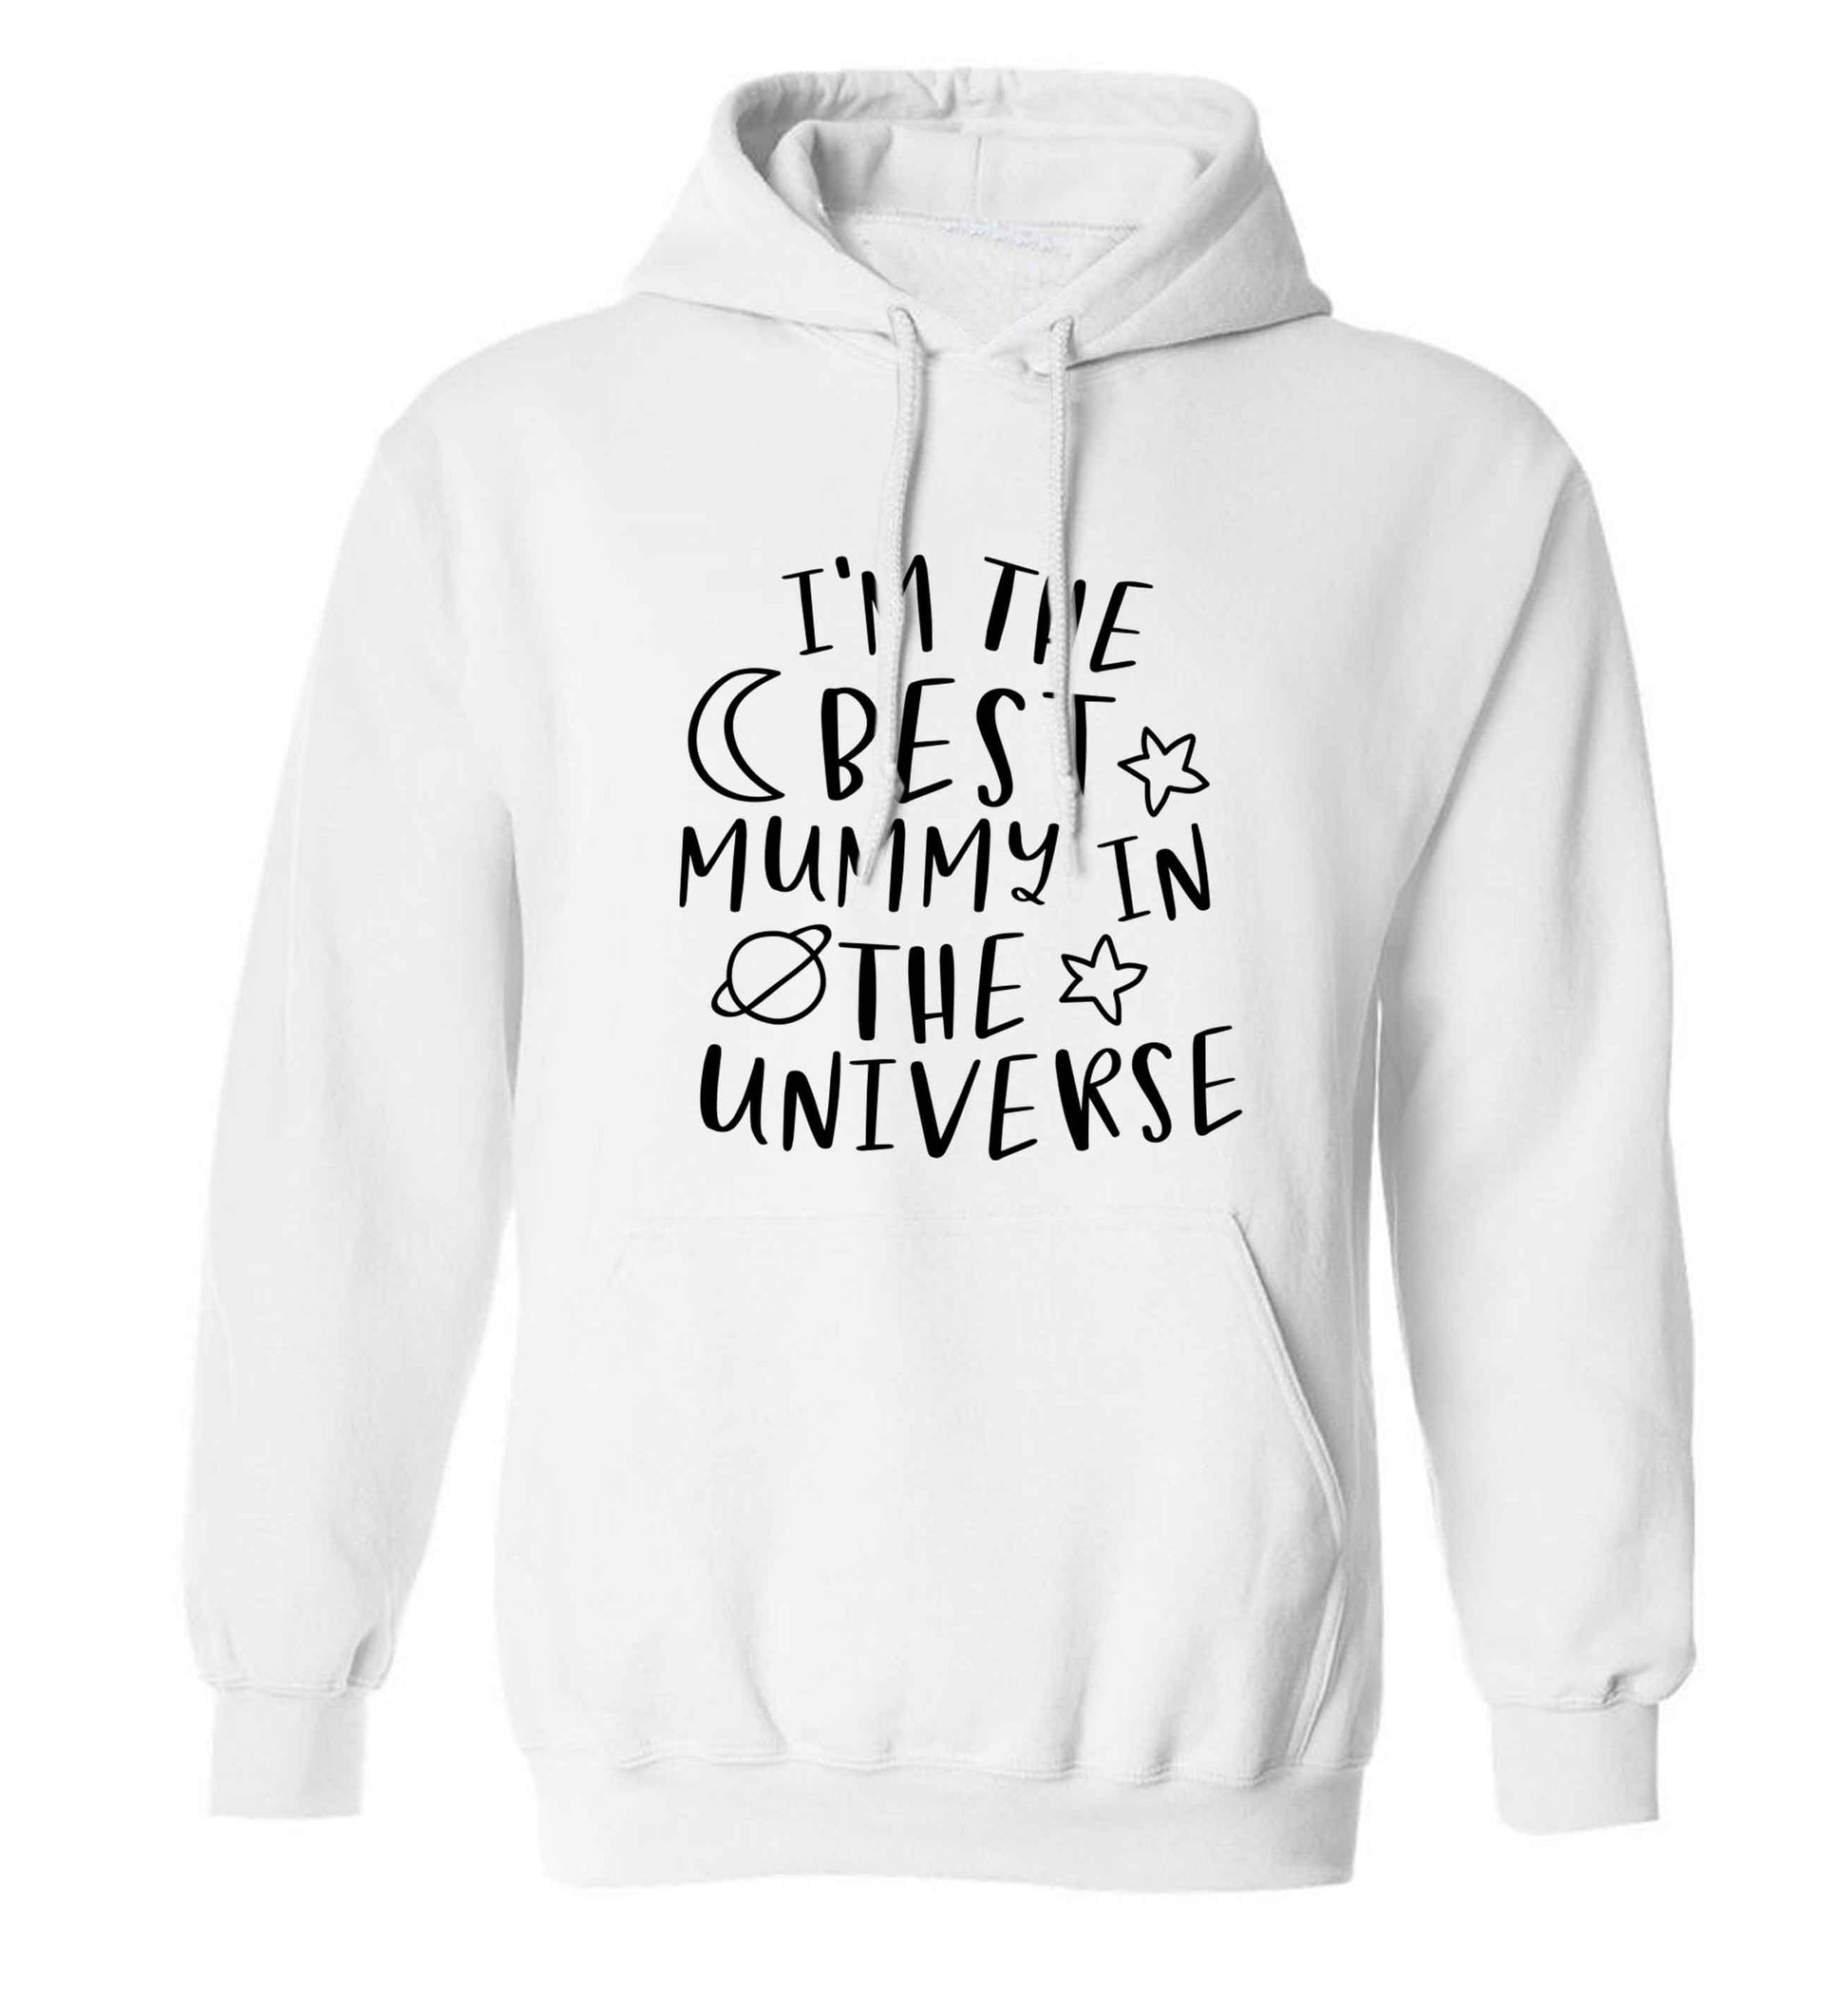 I'm the best mummy in the universe adults unisex white hoodie 2XL